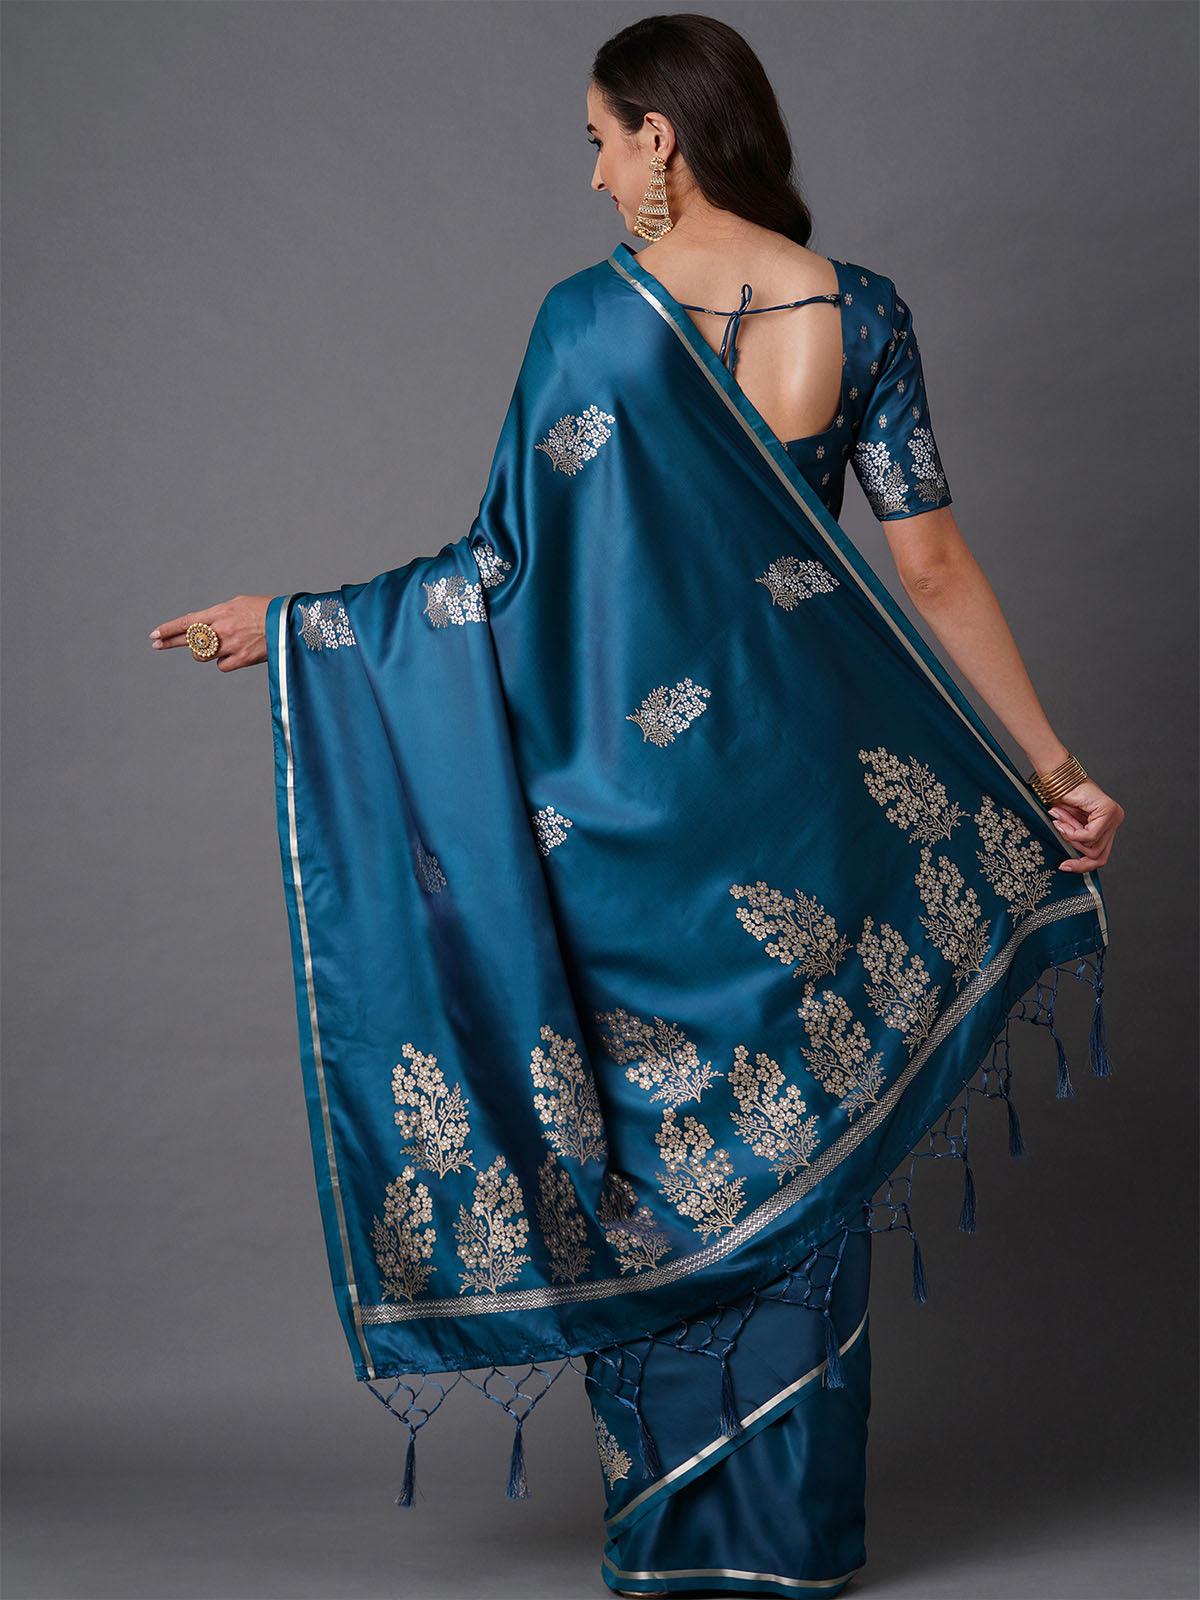 Women's Teal Blue Party Wear Silk Blend Woven Design Saree With Unstitched Blouse - Odette